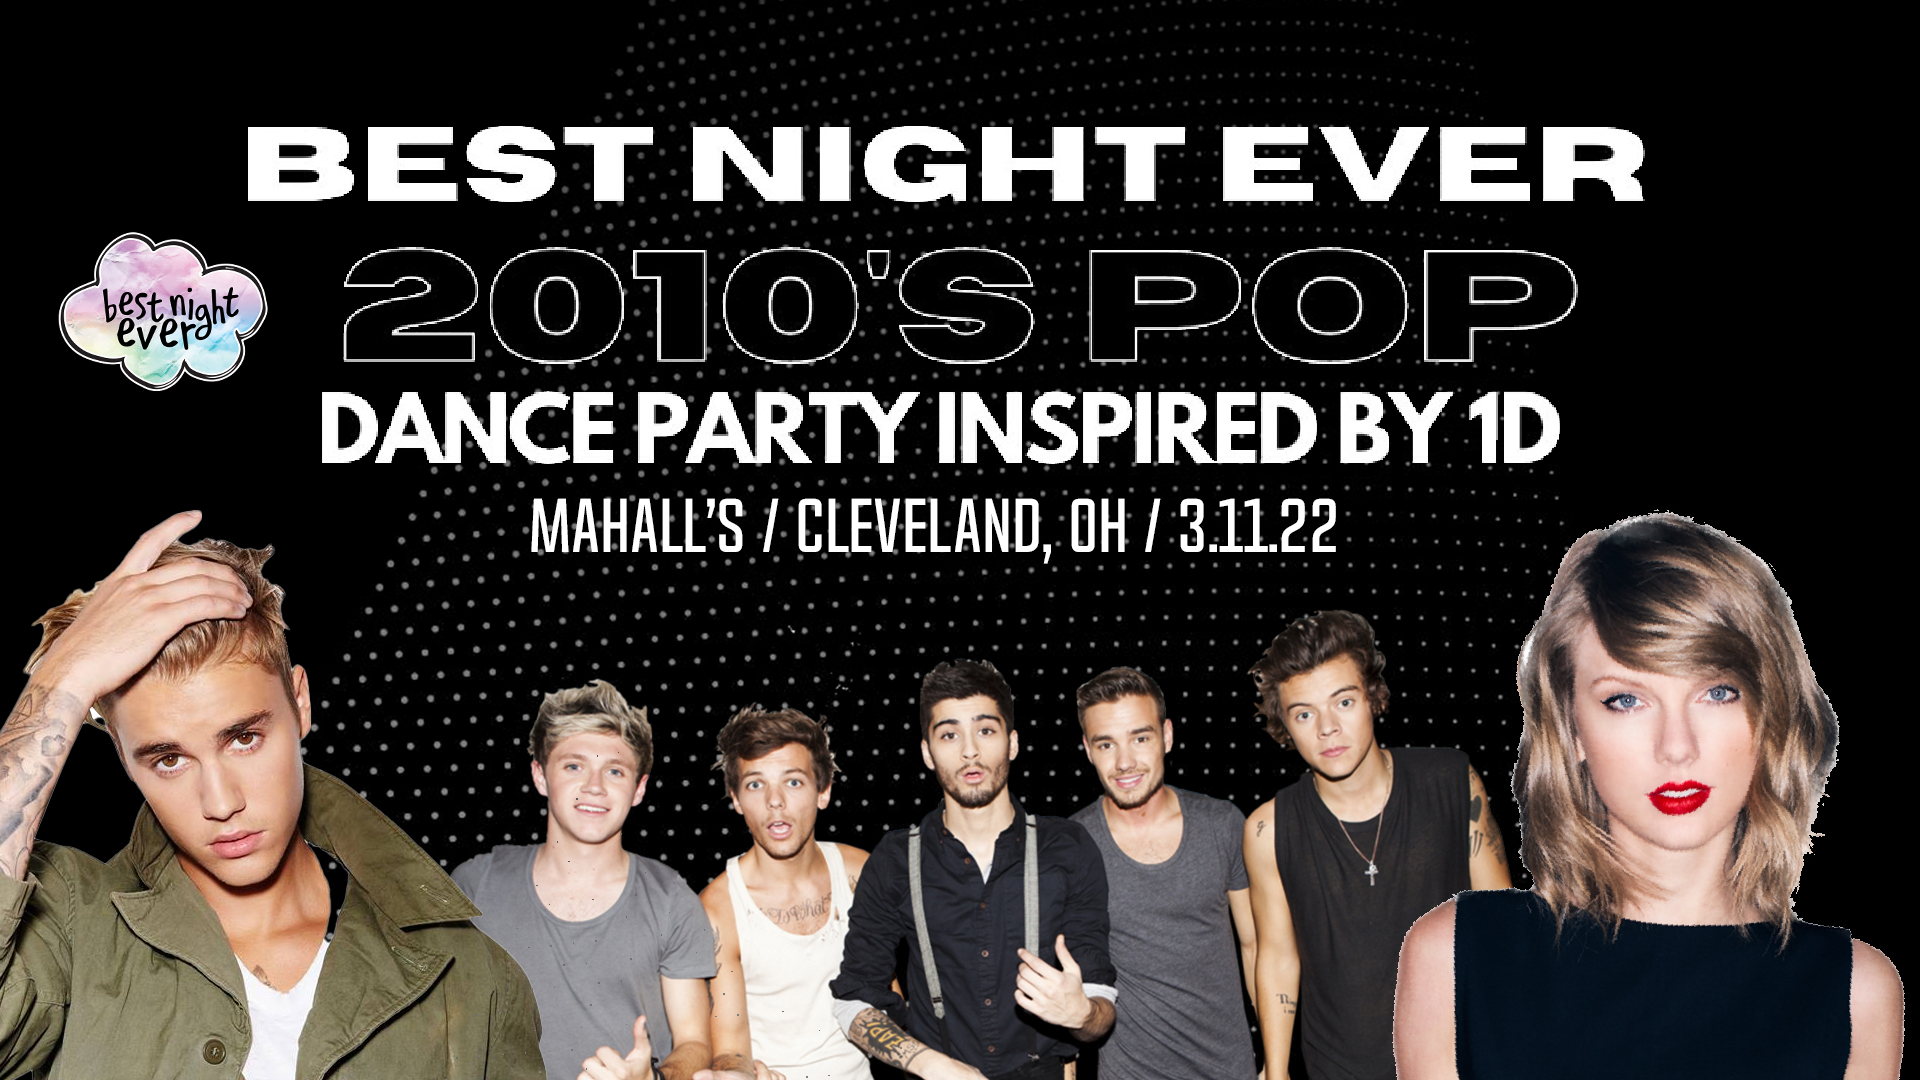 Buy Tickets To Best Night Ever 2010s Dance Party At Mahalls In